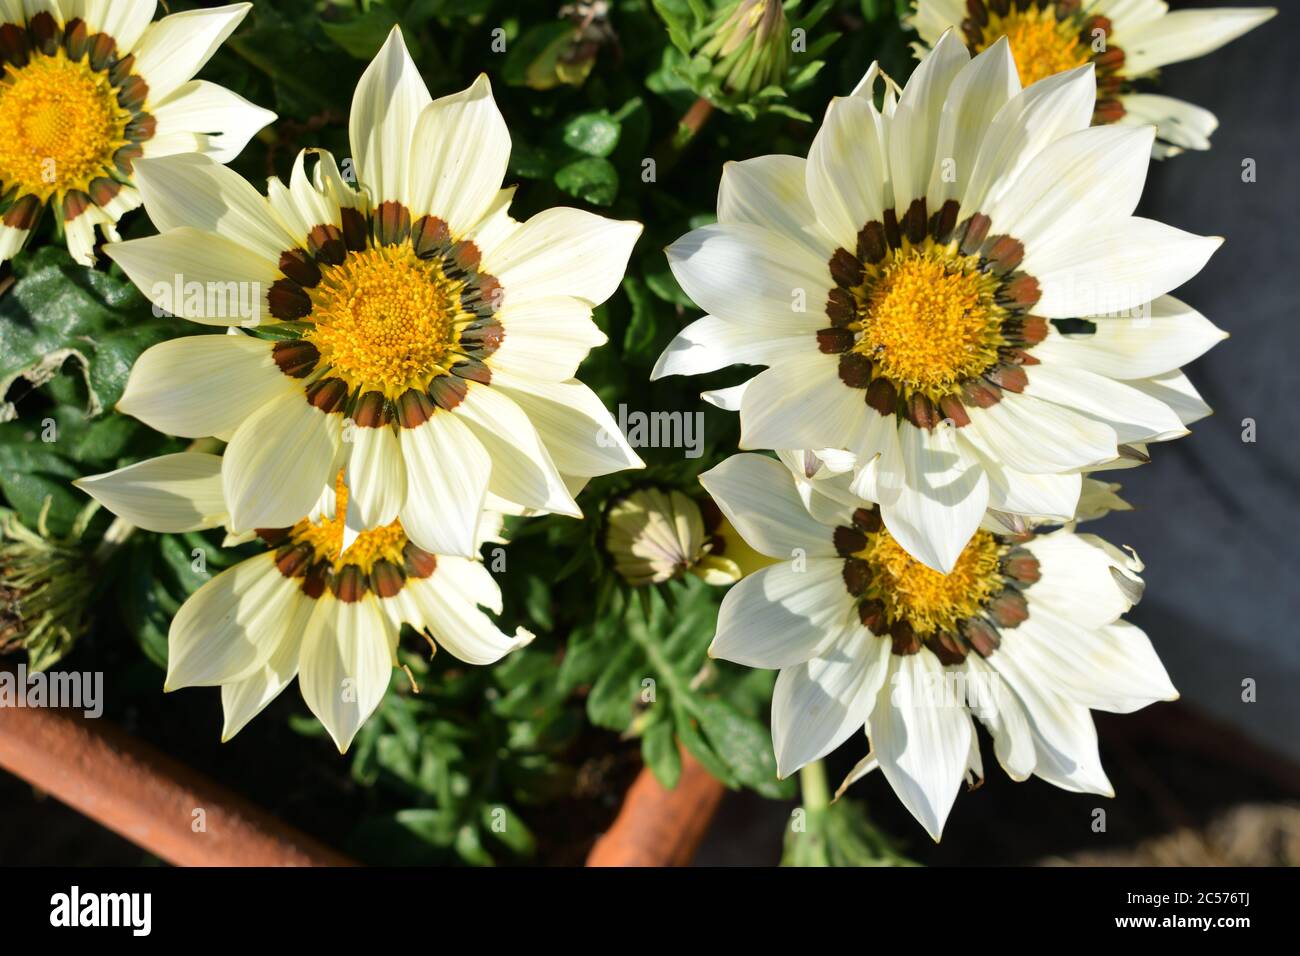 Gazania. Close up of white flowers with yellow centres. Stock Photo